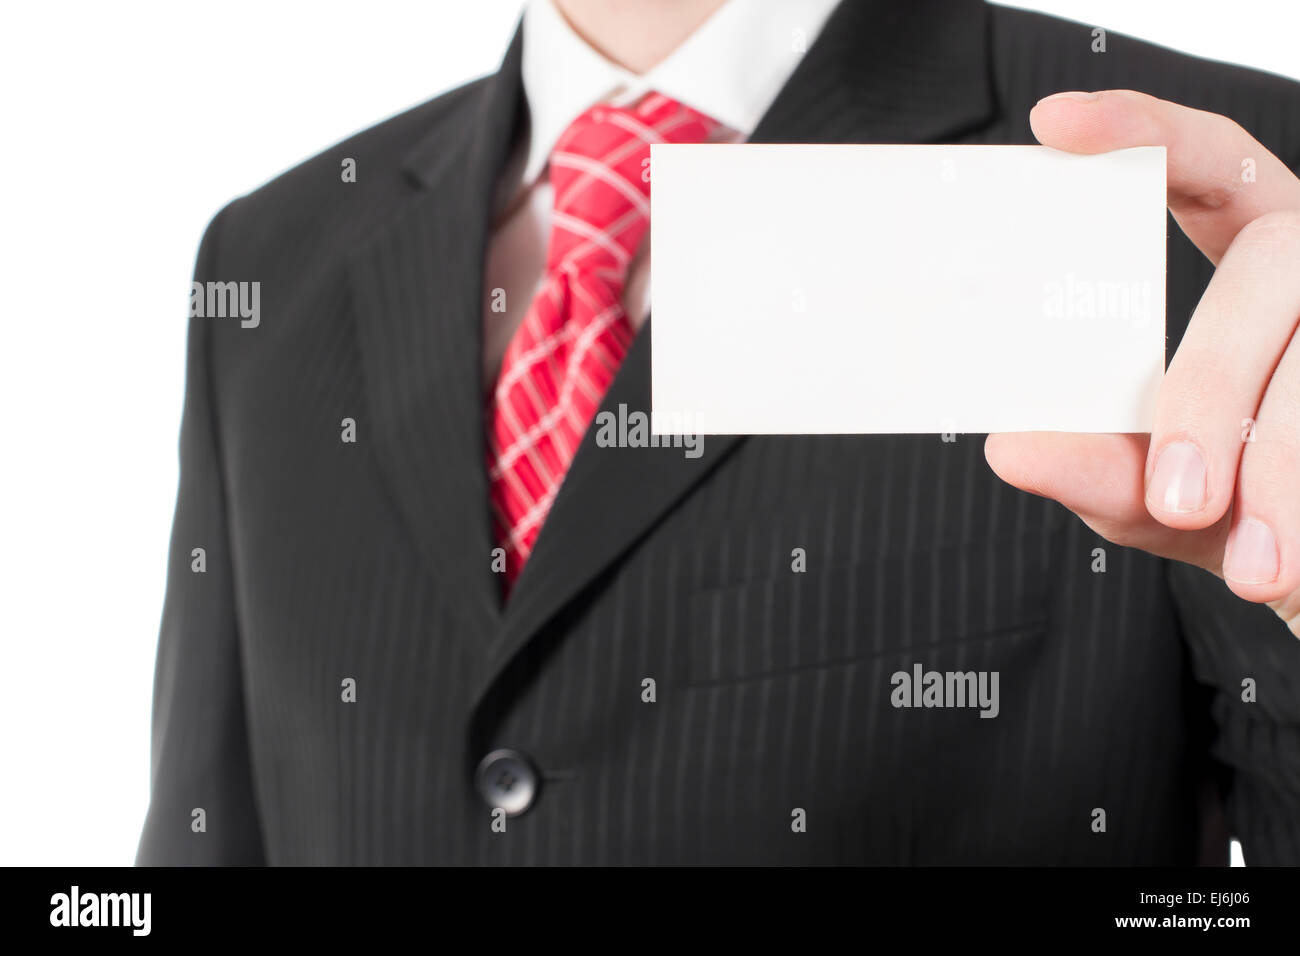 Card in hand at the man in the suit Stock Photo